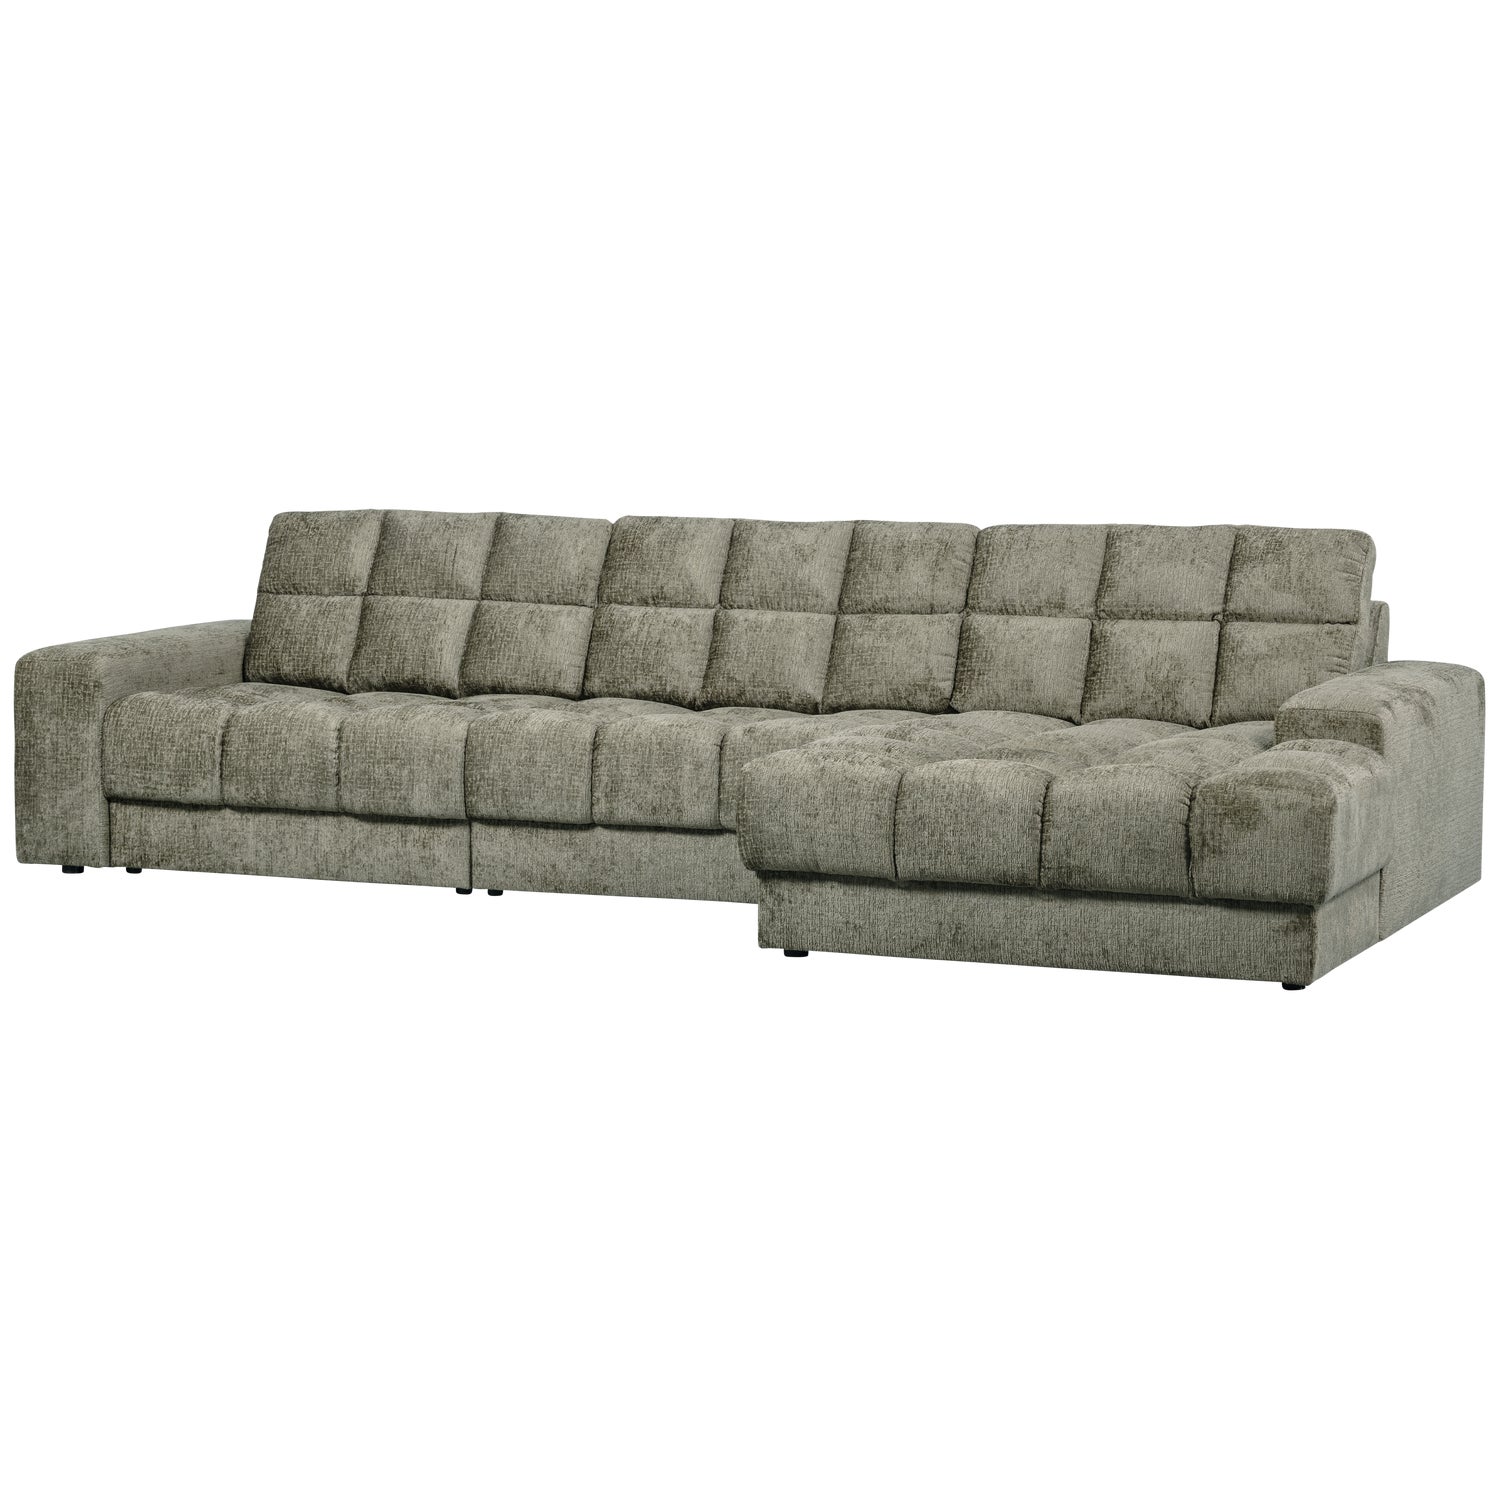 379013-FR-02_VS_WE_Second_date_chaise_longue_rechts_structure_velvet_frost_SA.png?auto=webp&format=png&width=1500&height=1500